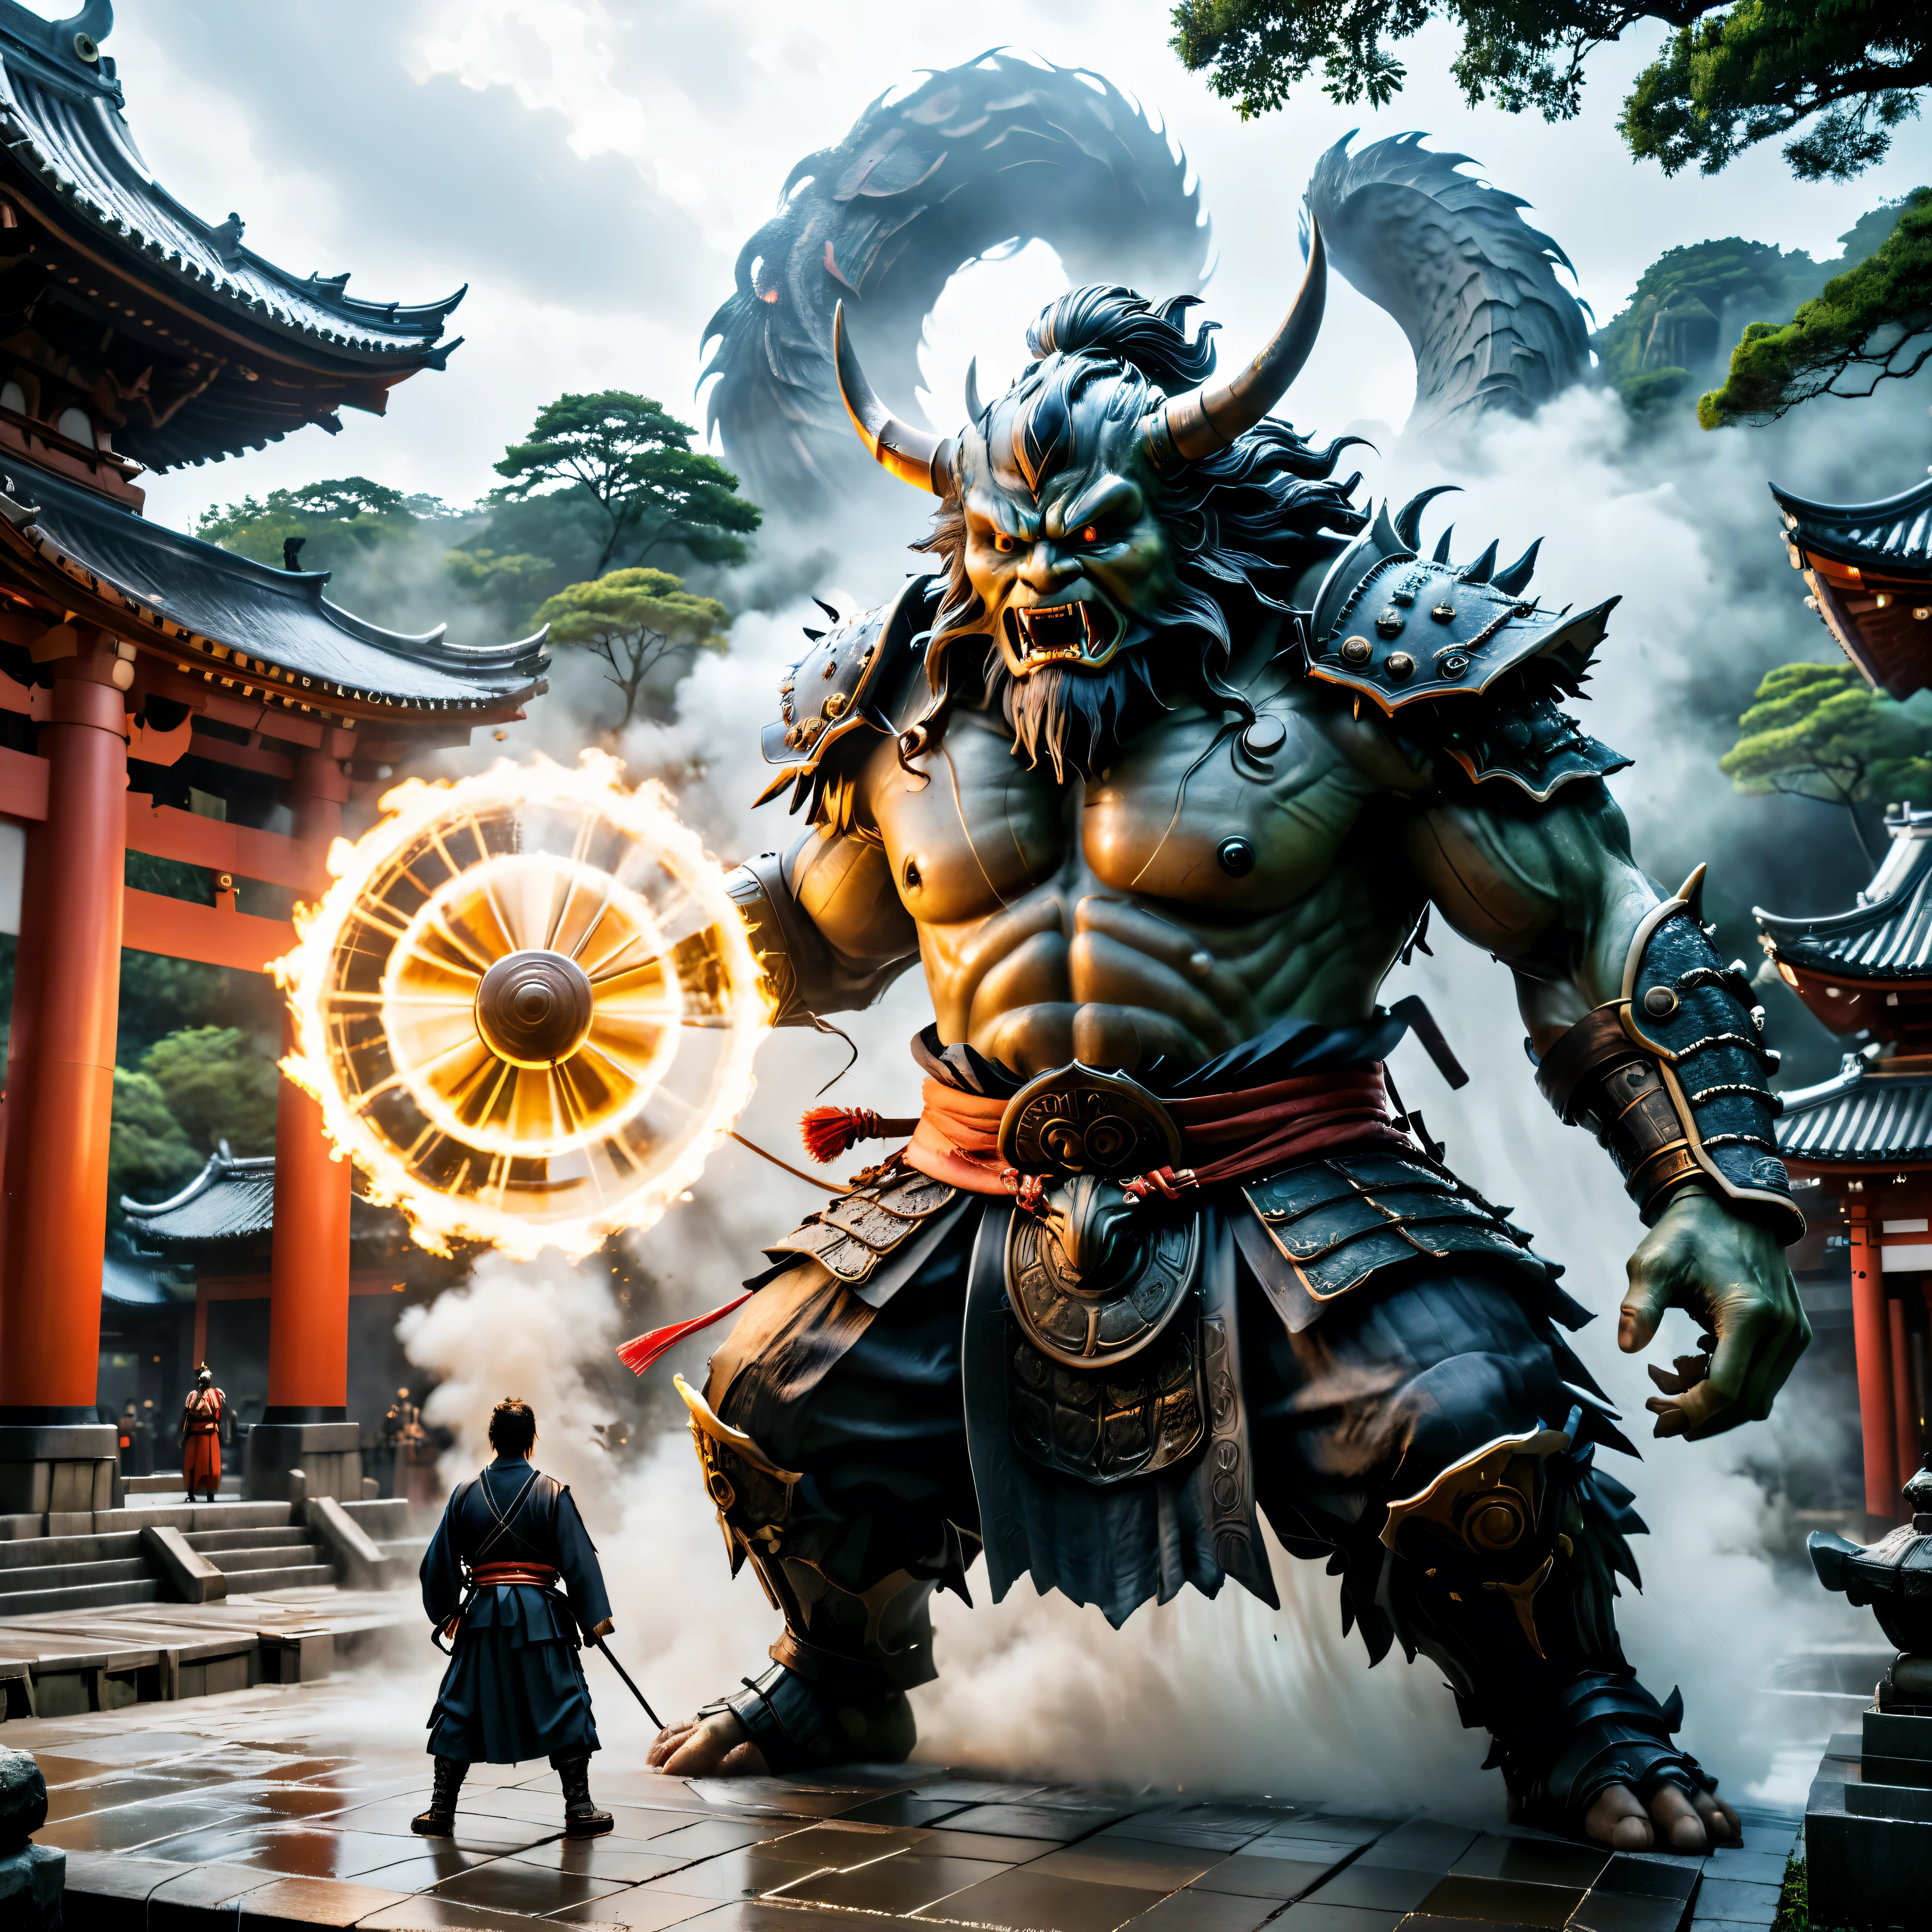 ((Masterpiece in maximum 16K resolution):1.6),((soft_color_photograpy:)1.5), ((Ultra-Detailed):1.4),((Movie-like still images and dynamic angles):1.3),((final showdown scene):1.1) | (Cinematic photo of a samurai facing a giant yokai monster at a temple), (cinematic lens), (samurai), (giant yokai), (shimmer), (tyndall effect), (visual experience), (Realism), (Realistic), award-winning graphics, dark shot, film grain, extremely detailed, Digital Art, rtx, Unreal Engine, scene concept anti glare effect, All captured with sharp focus.